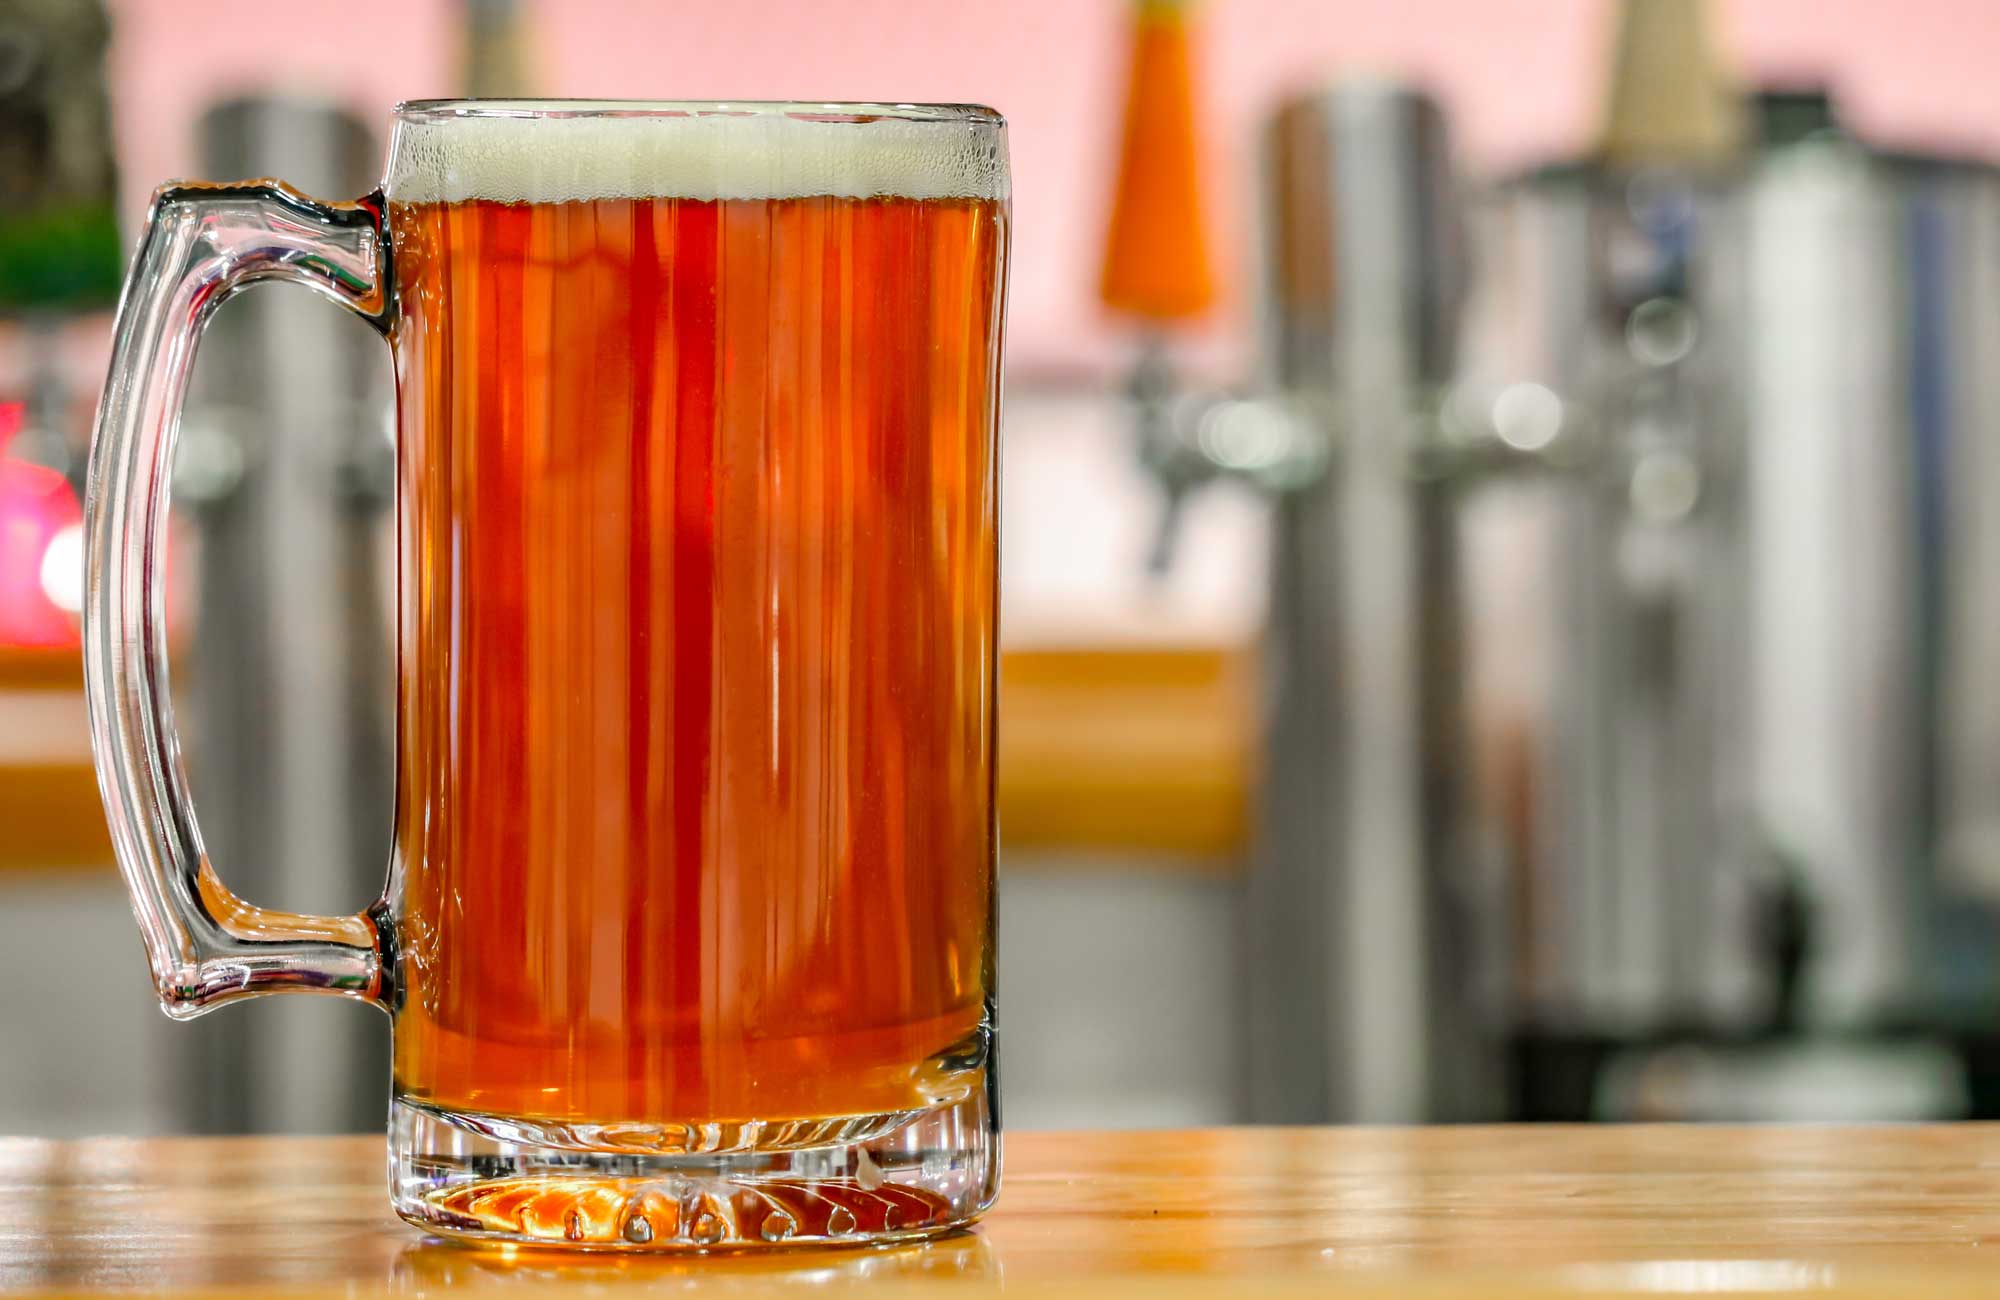 What If Your Computer Operating System Was A Beer?